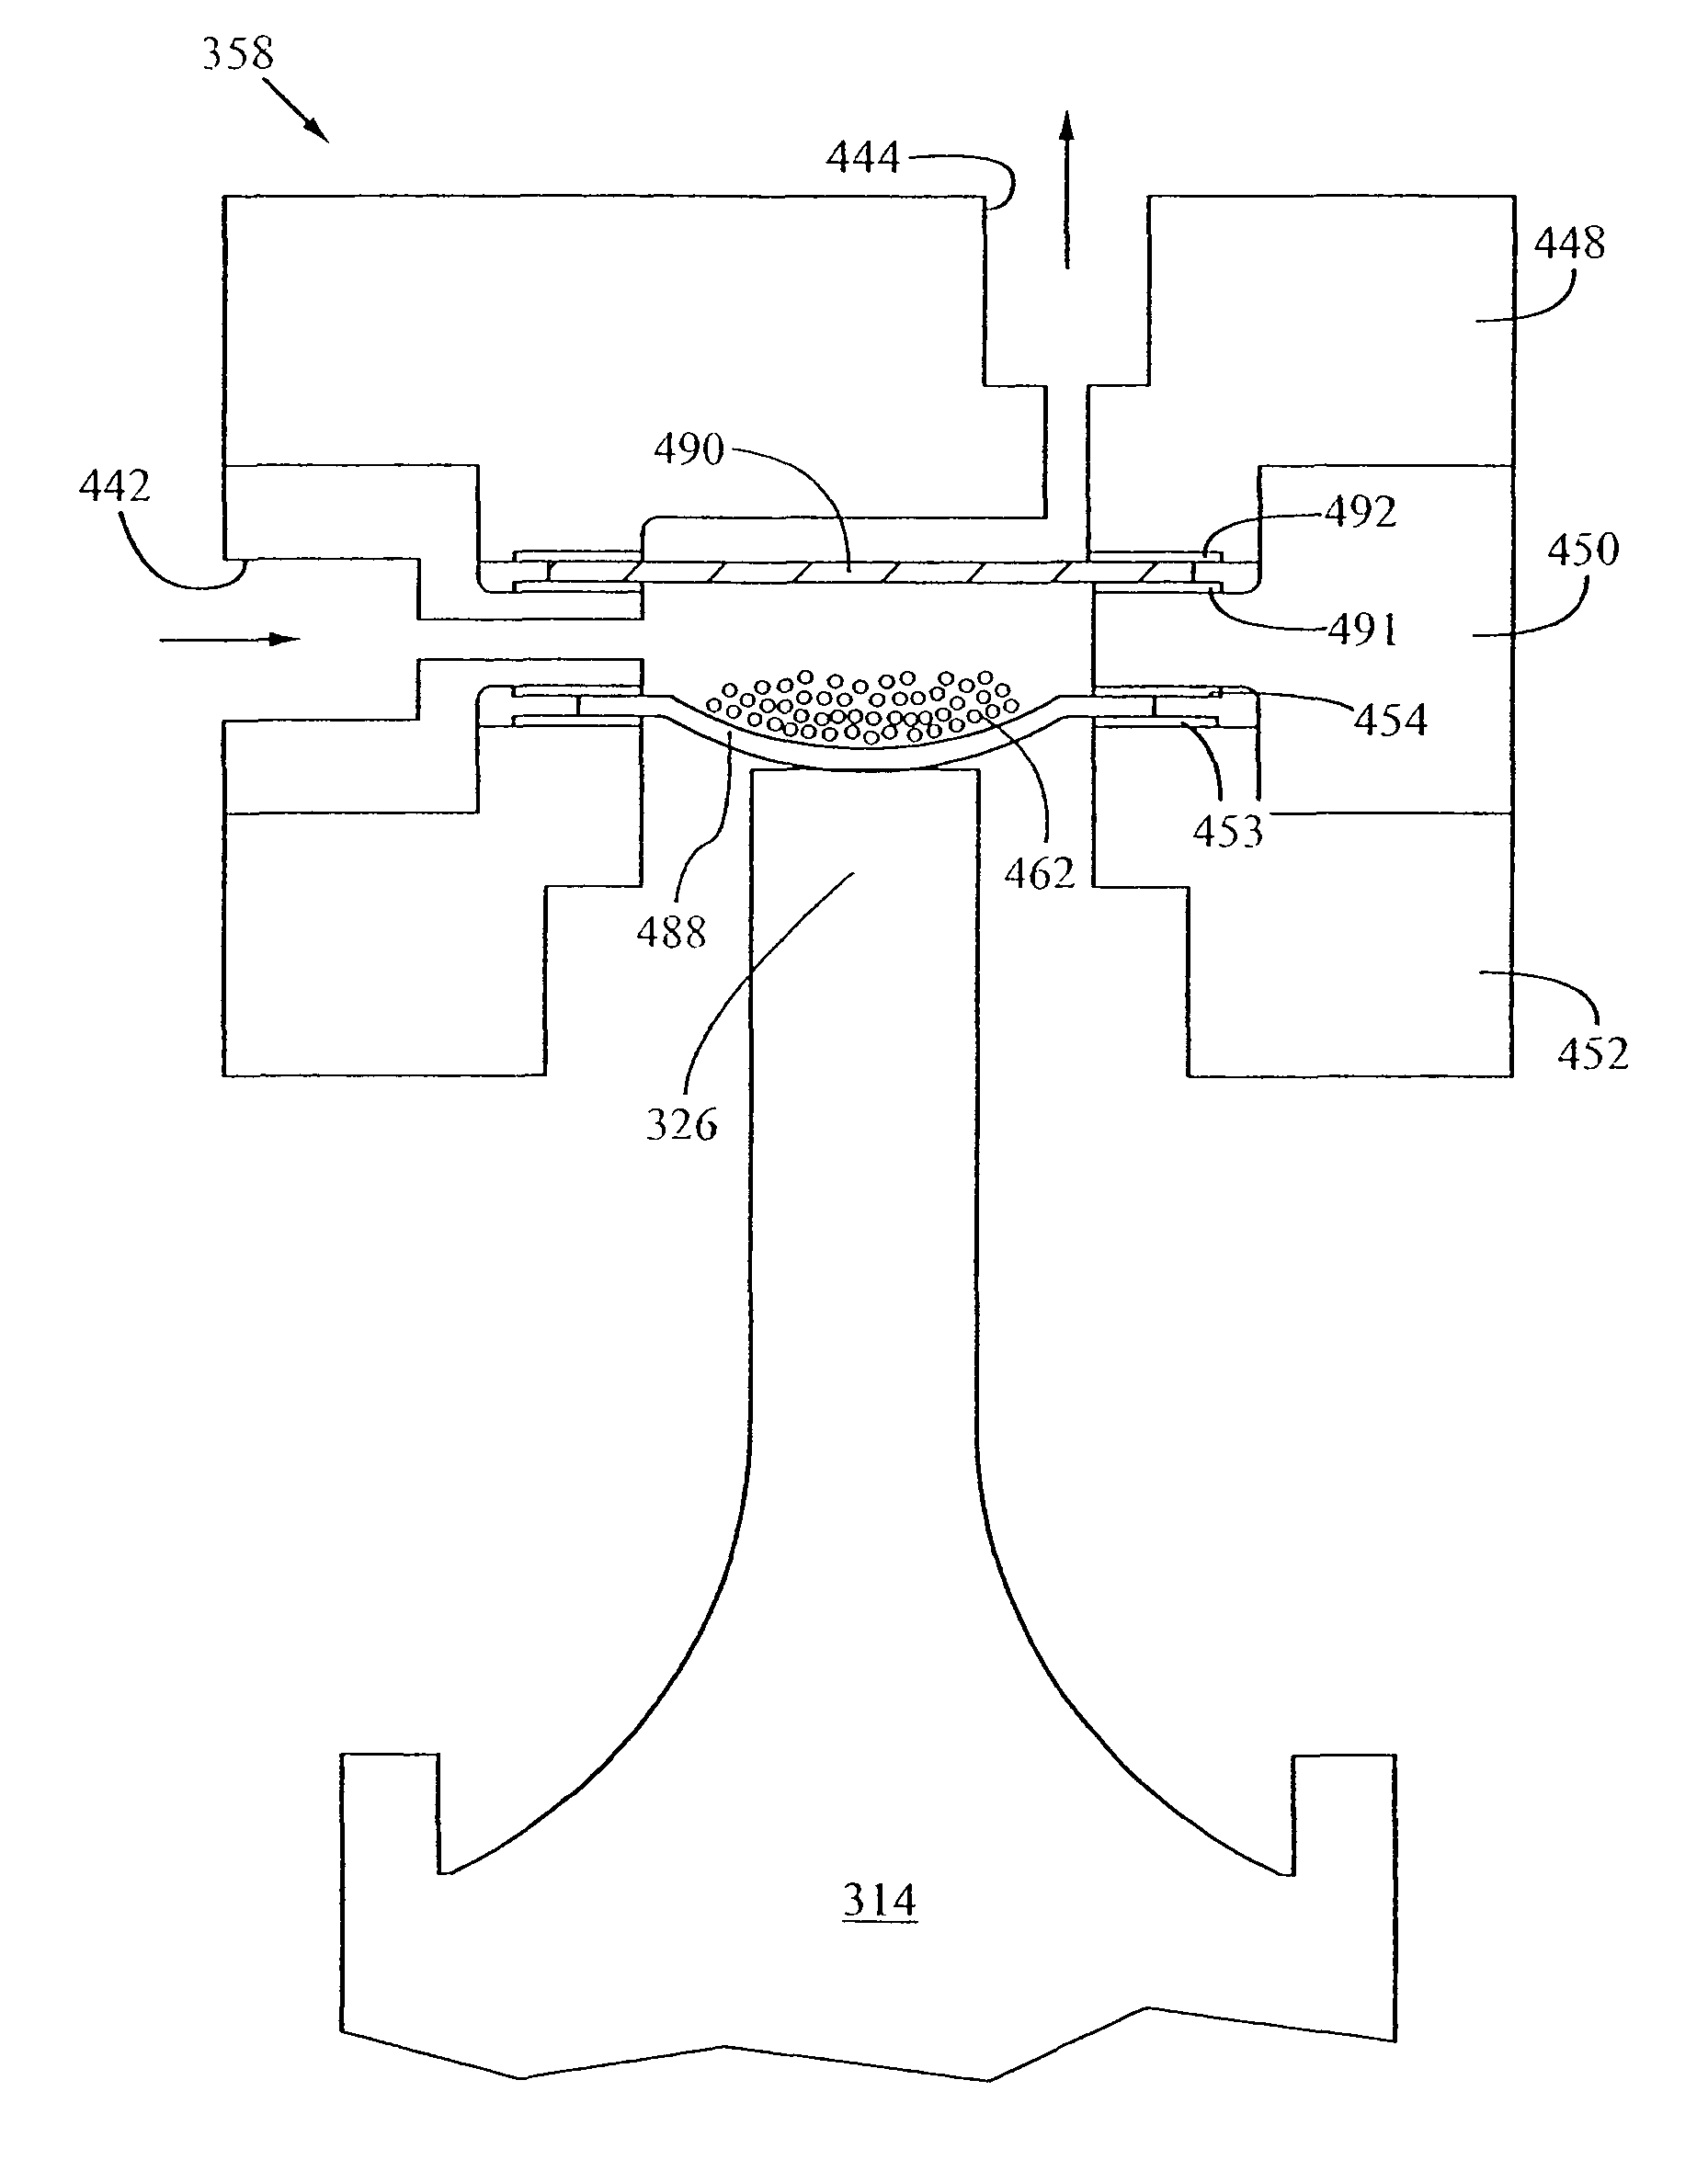 Apparatus and method for cell disruption